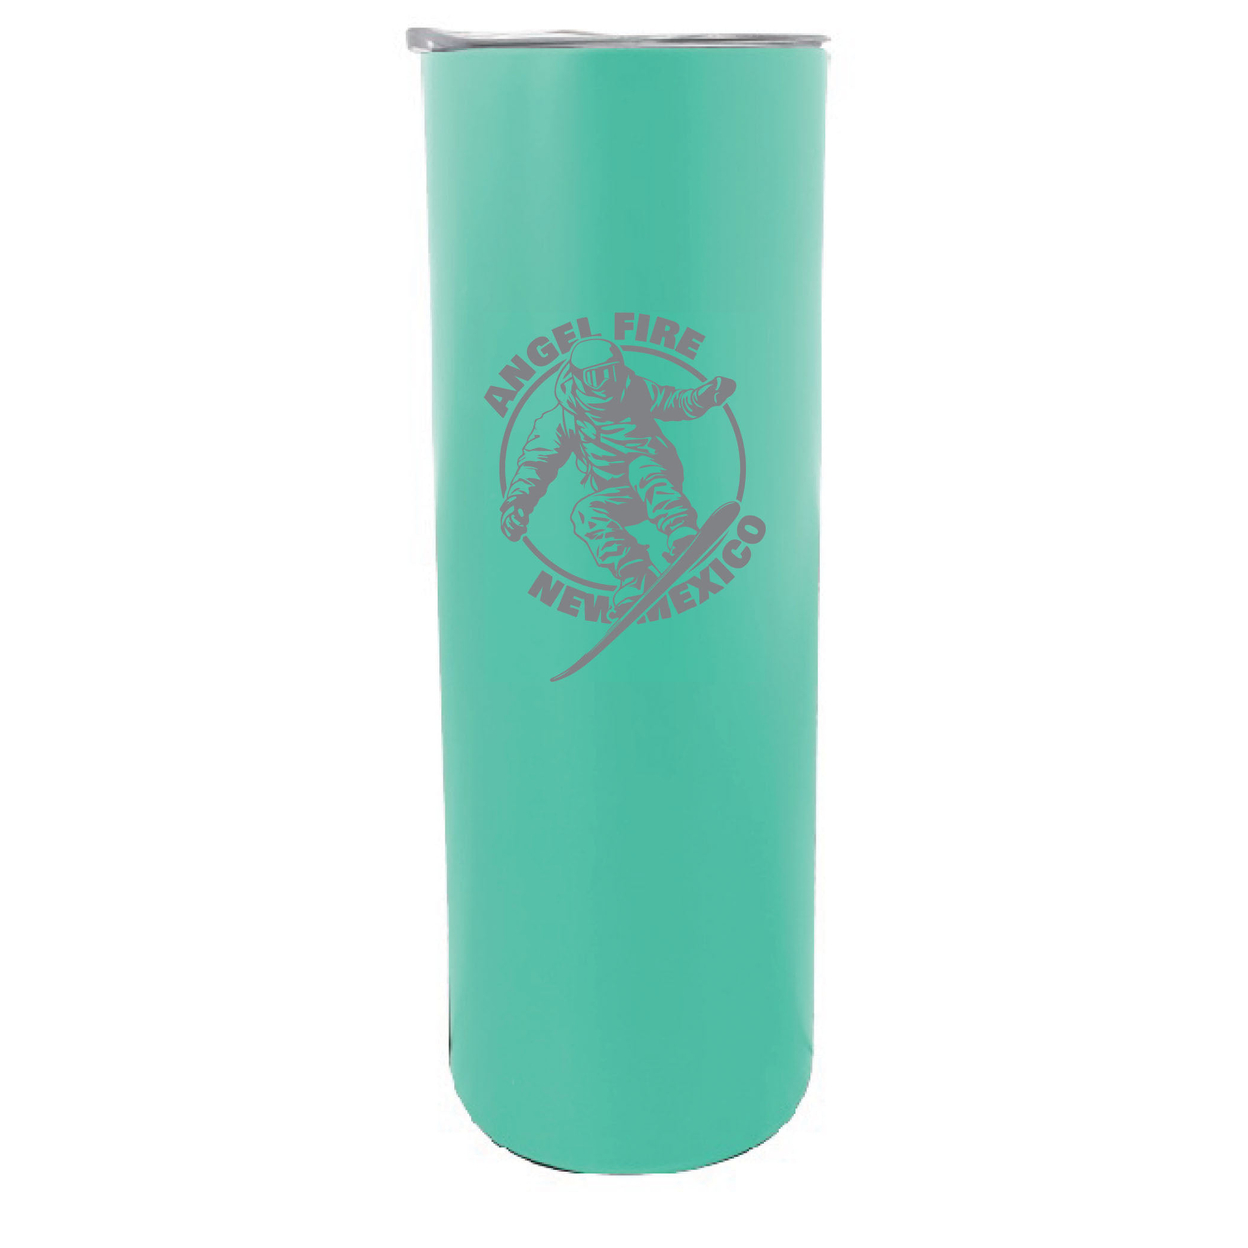 Angel Fire New Mexico Souvenir 20 Oz Engraved Insulated Stainless Steel Skinny Tumbler - Black,,2-Pack